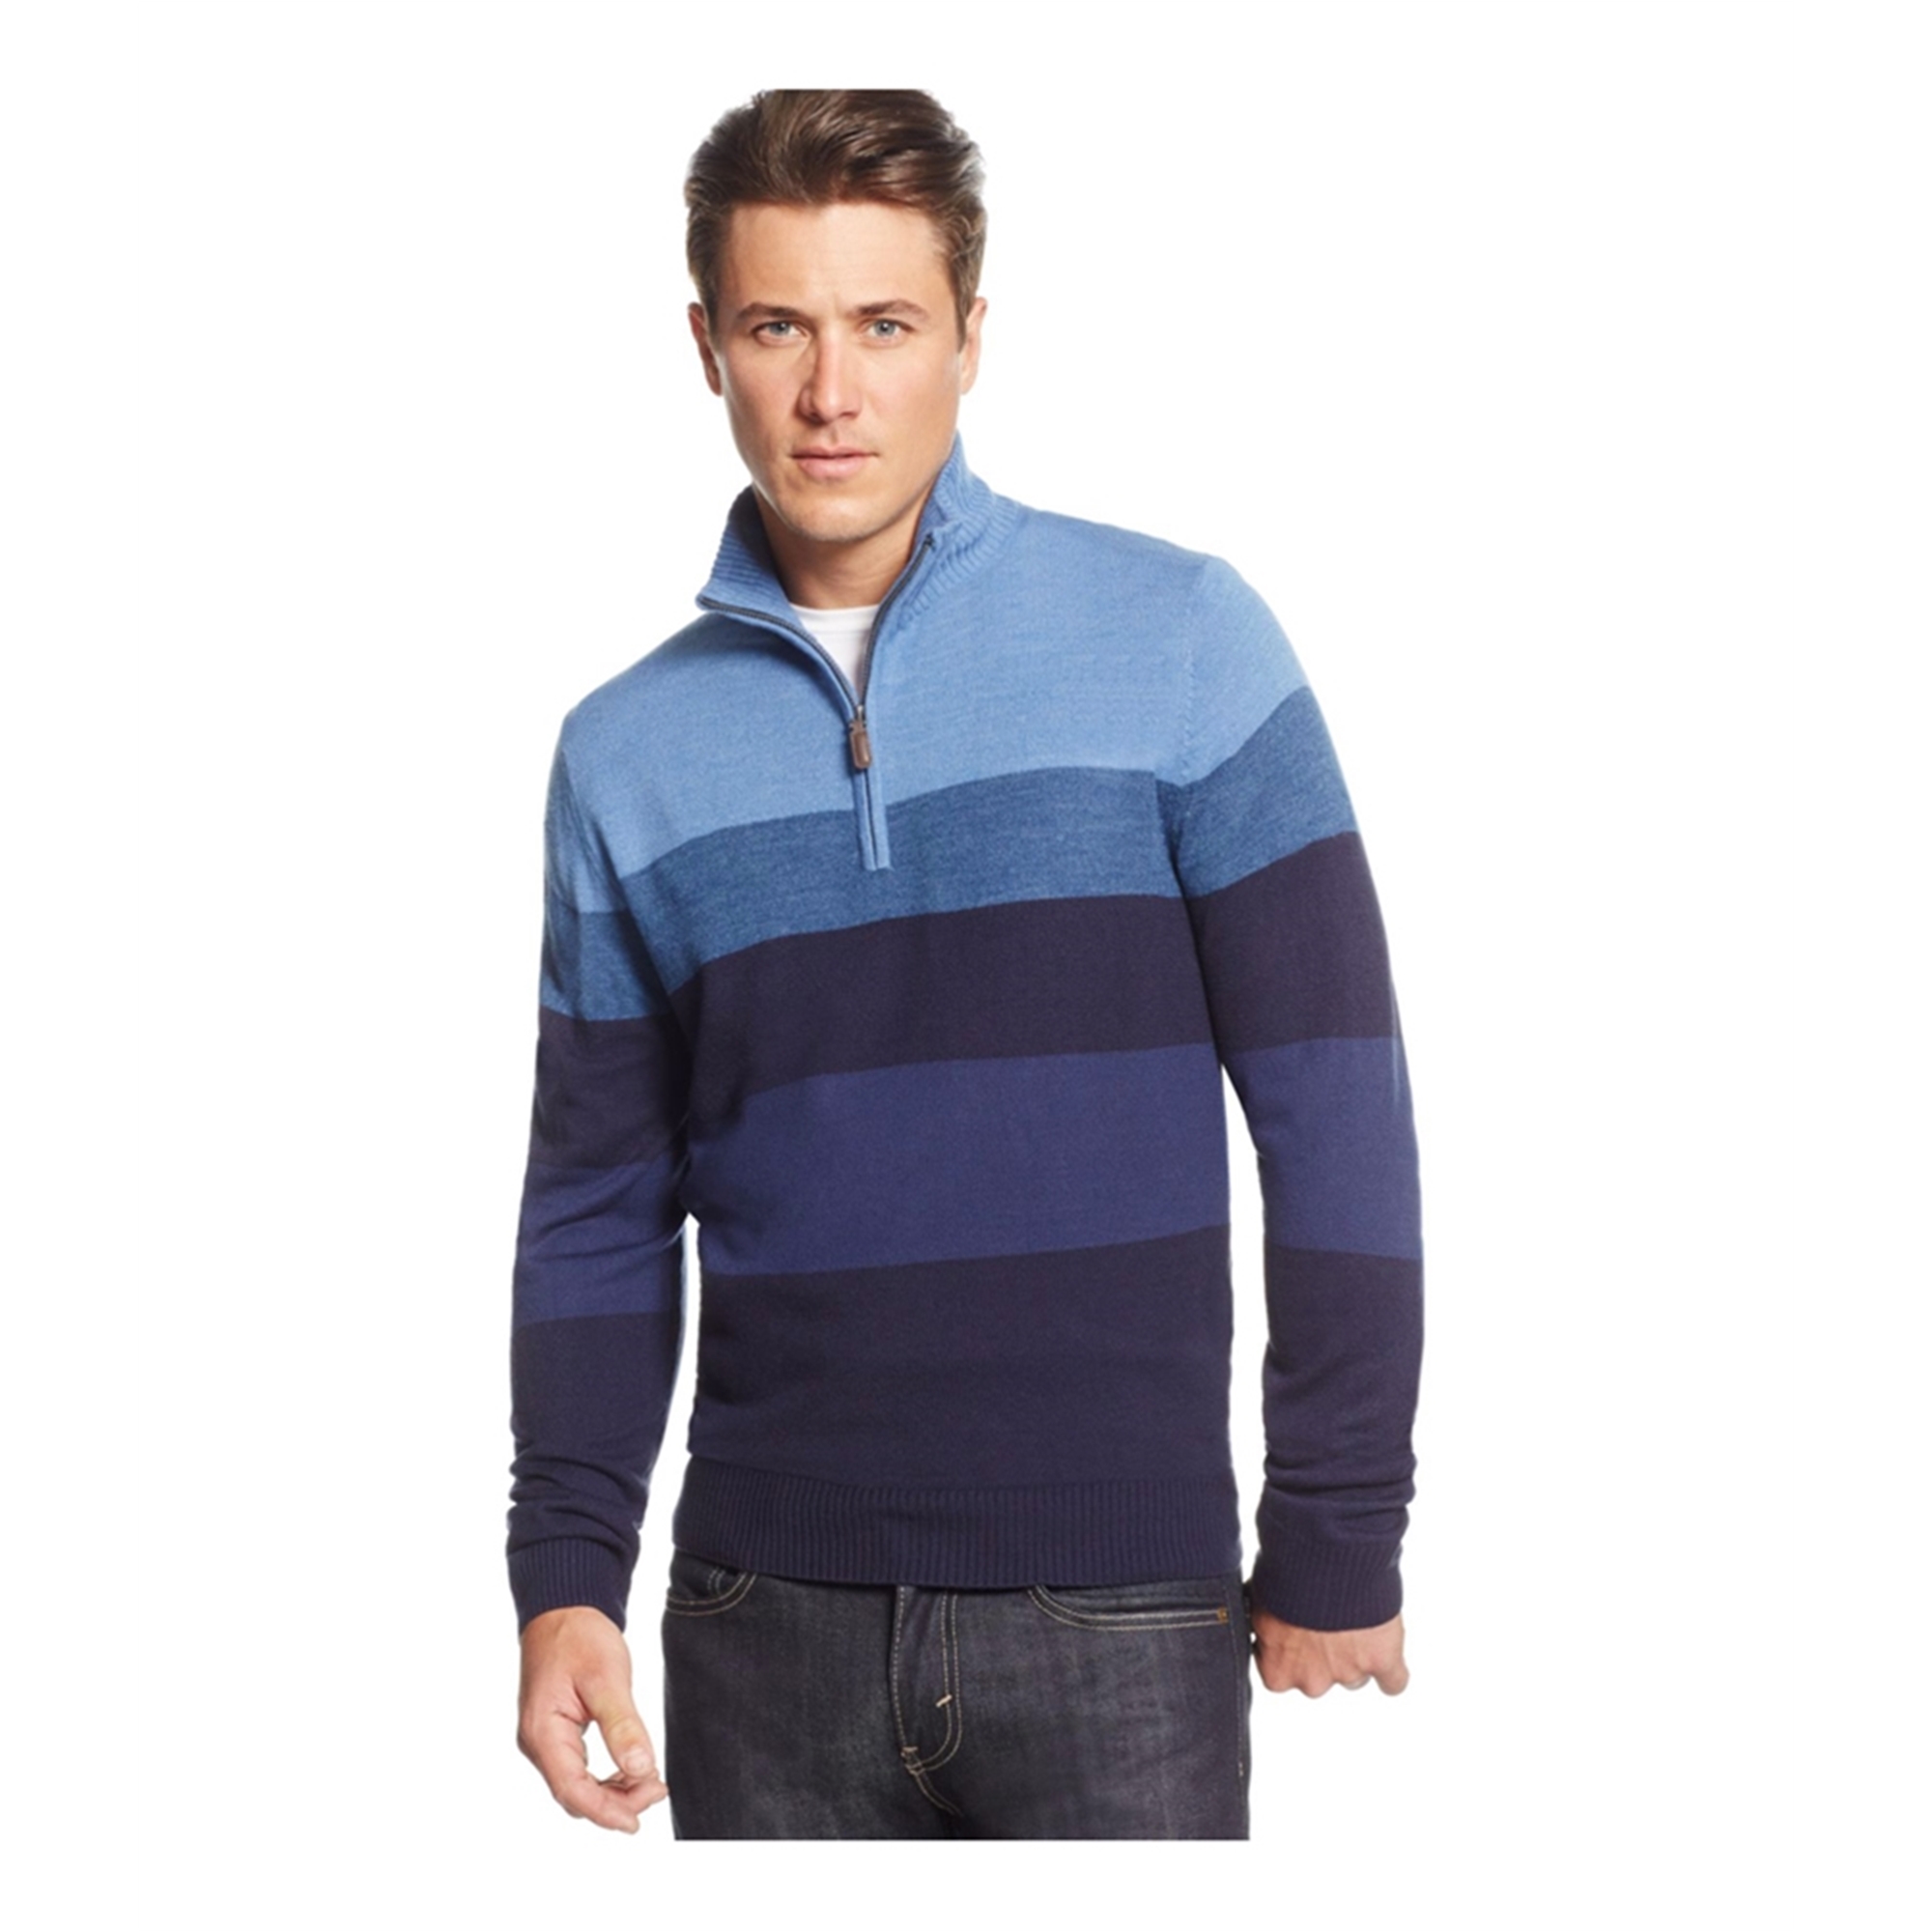 Tricots St Raphael Mens Colorblock 1/4 Zip Pullover Sweater | Mens ...